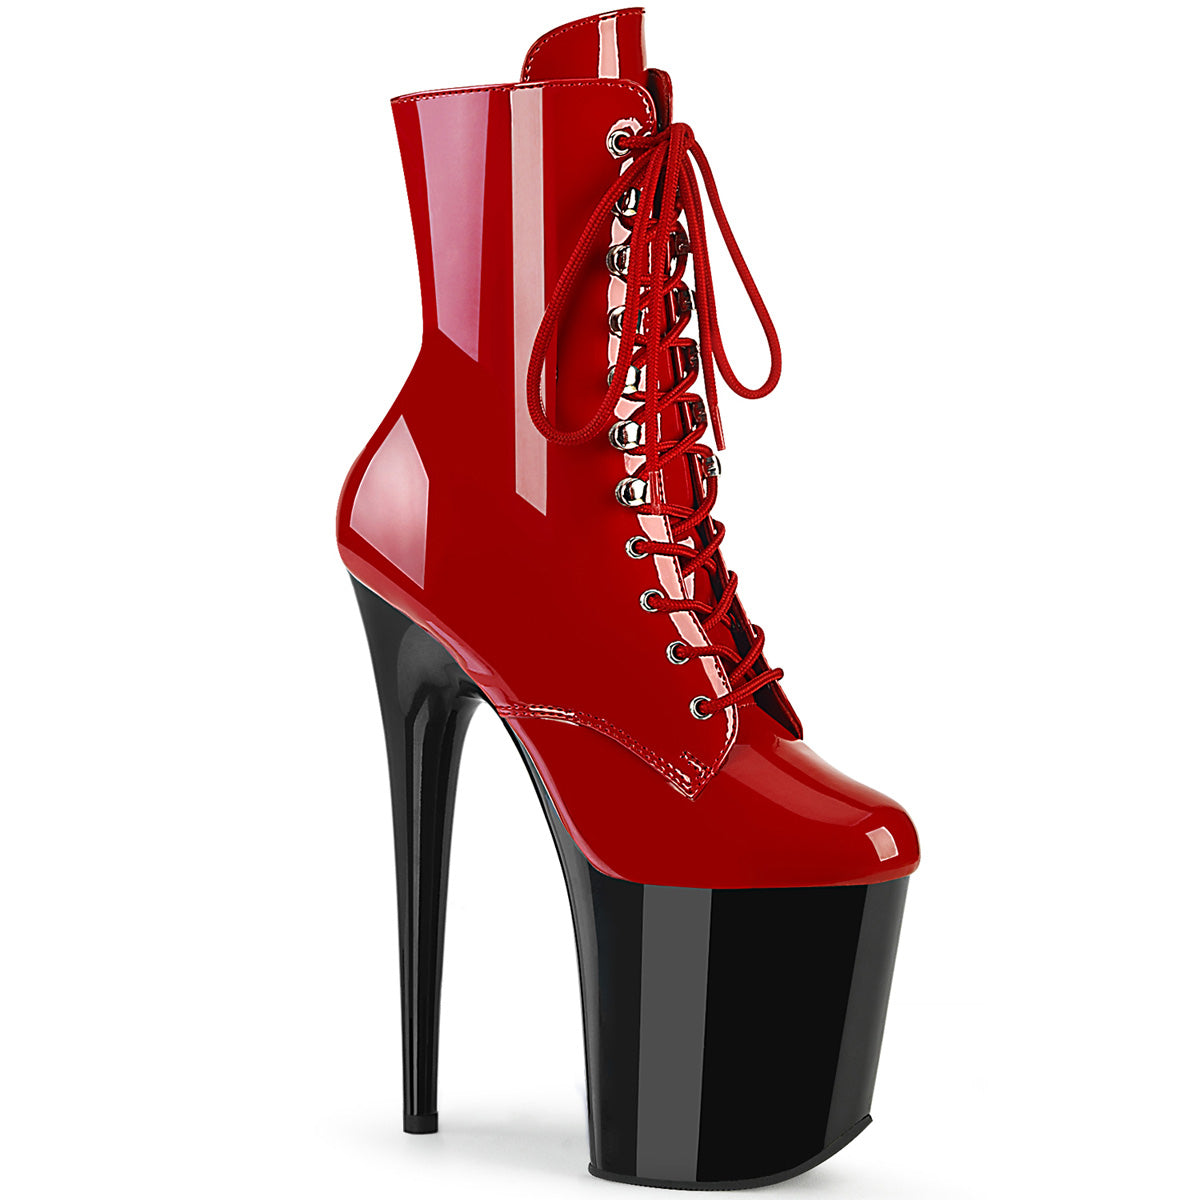 FLAMINGO-1020 Red/Black Ankle Boots